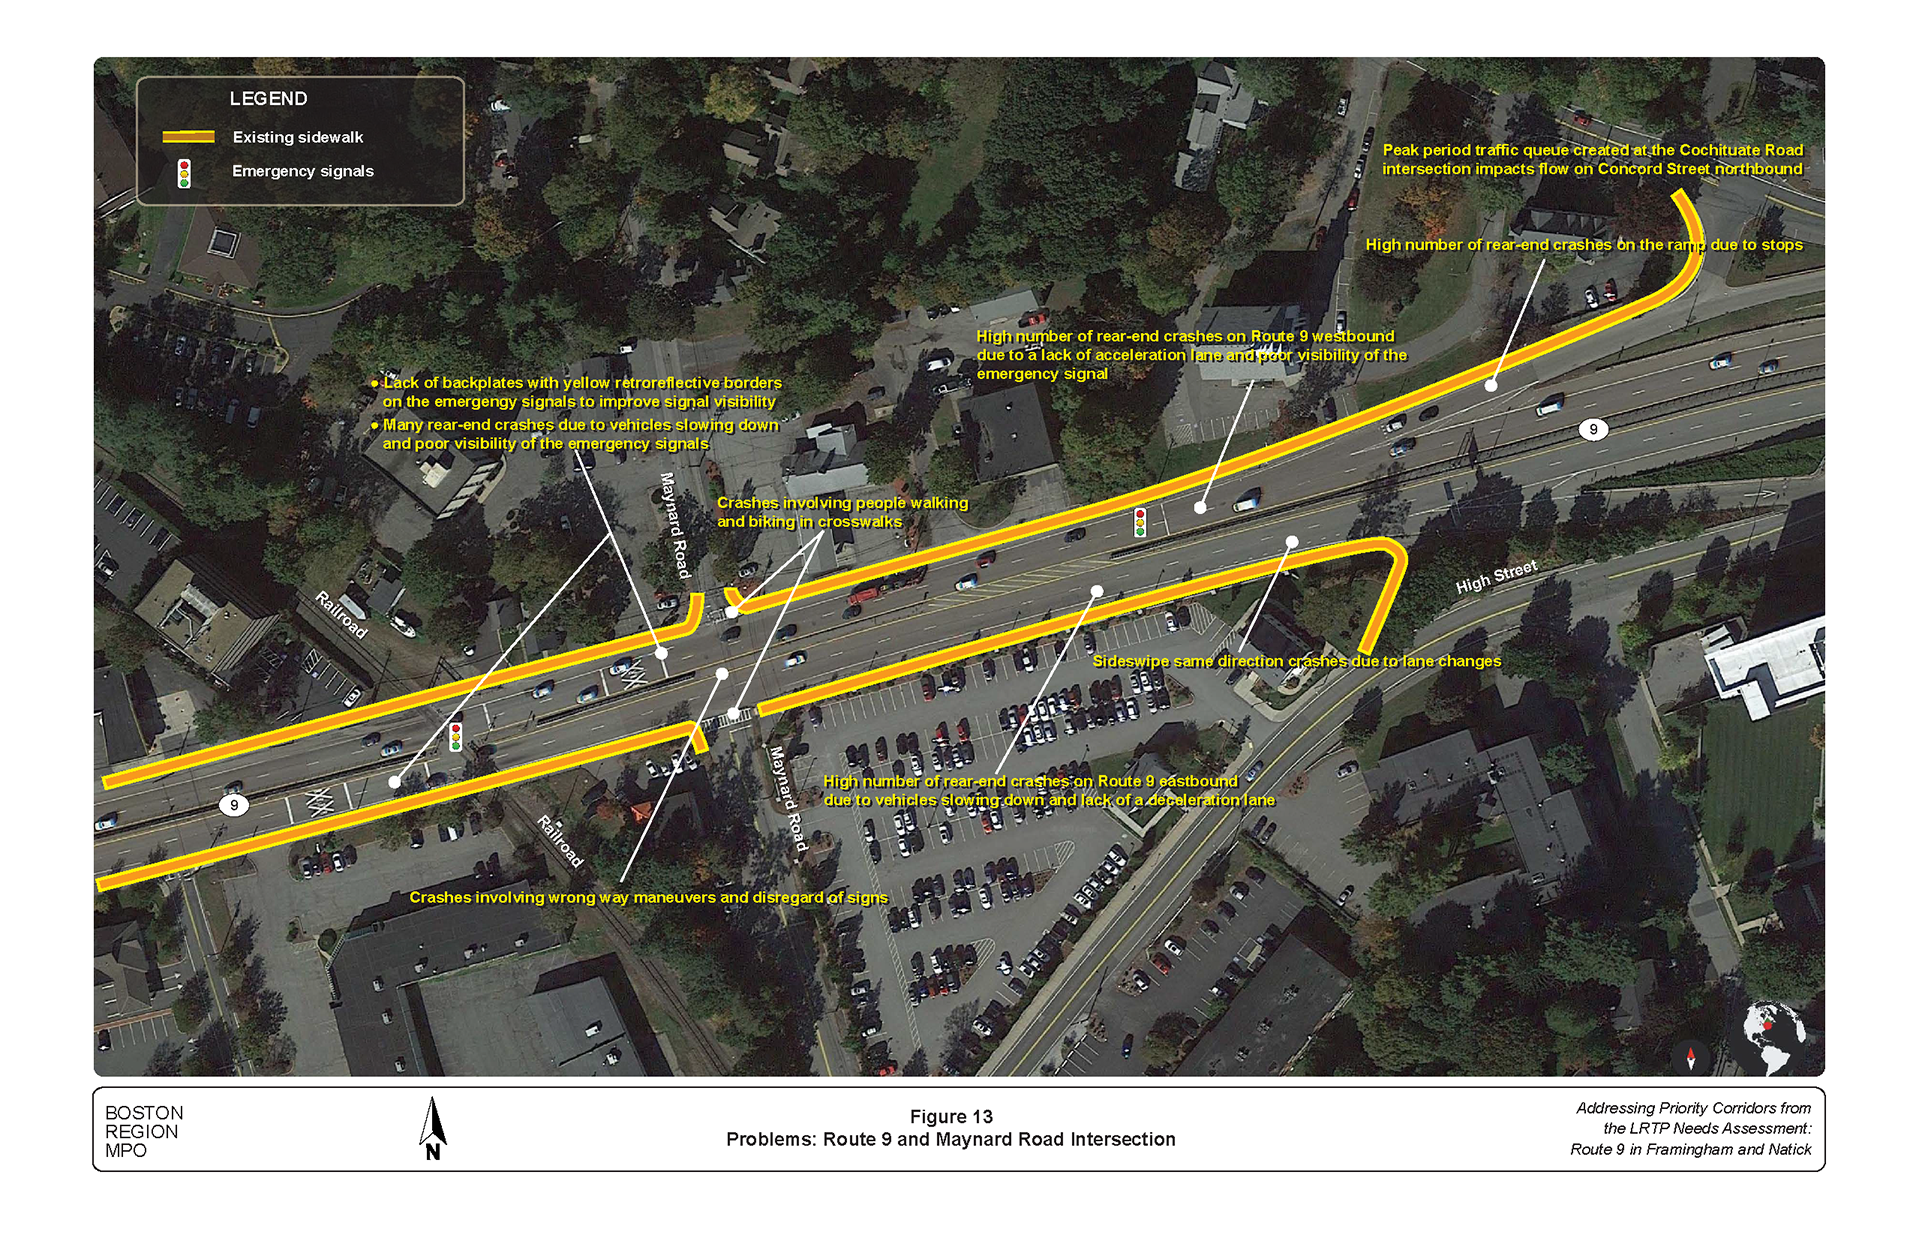 Figure 13 is an aerial photo showing the intersection of Route 9 and Maynard Road and the problems